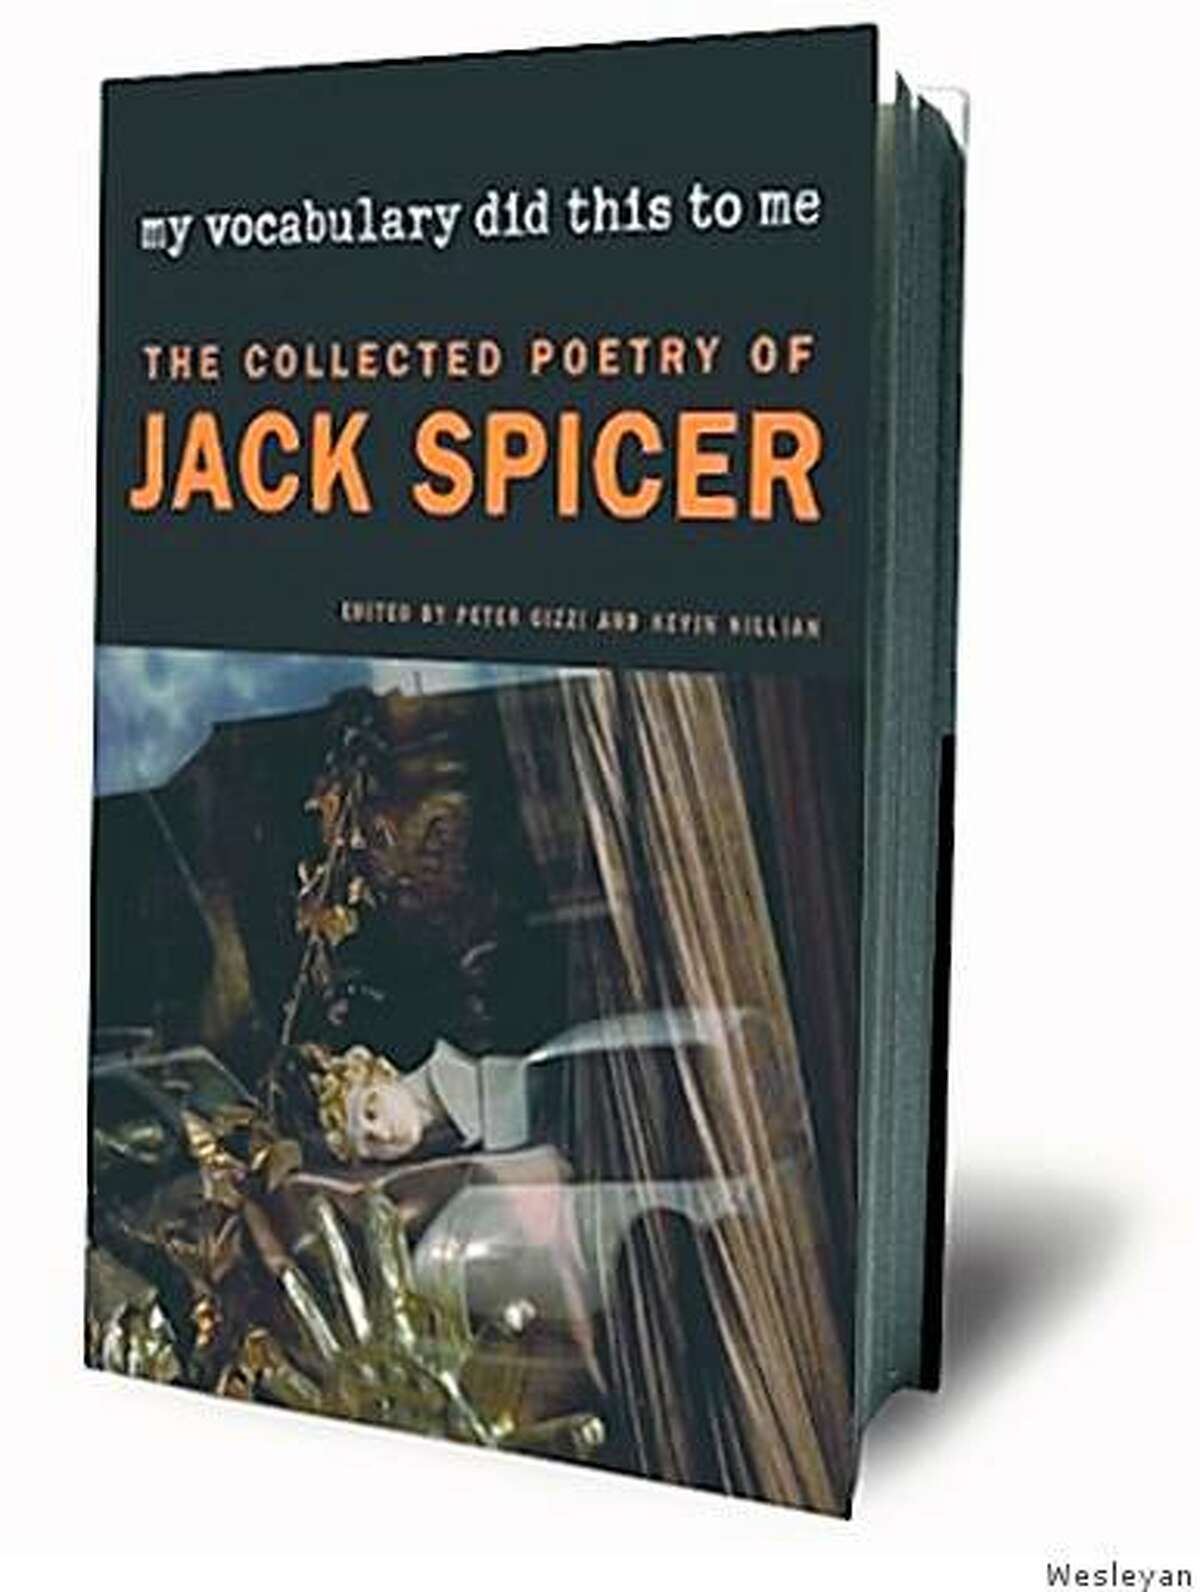 My Vocabulary Did This to Me: The Collected Poetry of Jack Spicer by by Jack Spicer (Author), Peter Gizzi (Editor), Kevin Killian (Editor)